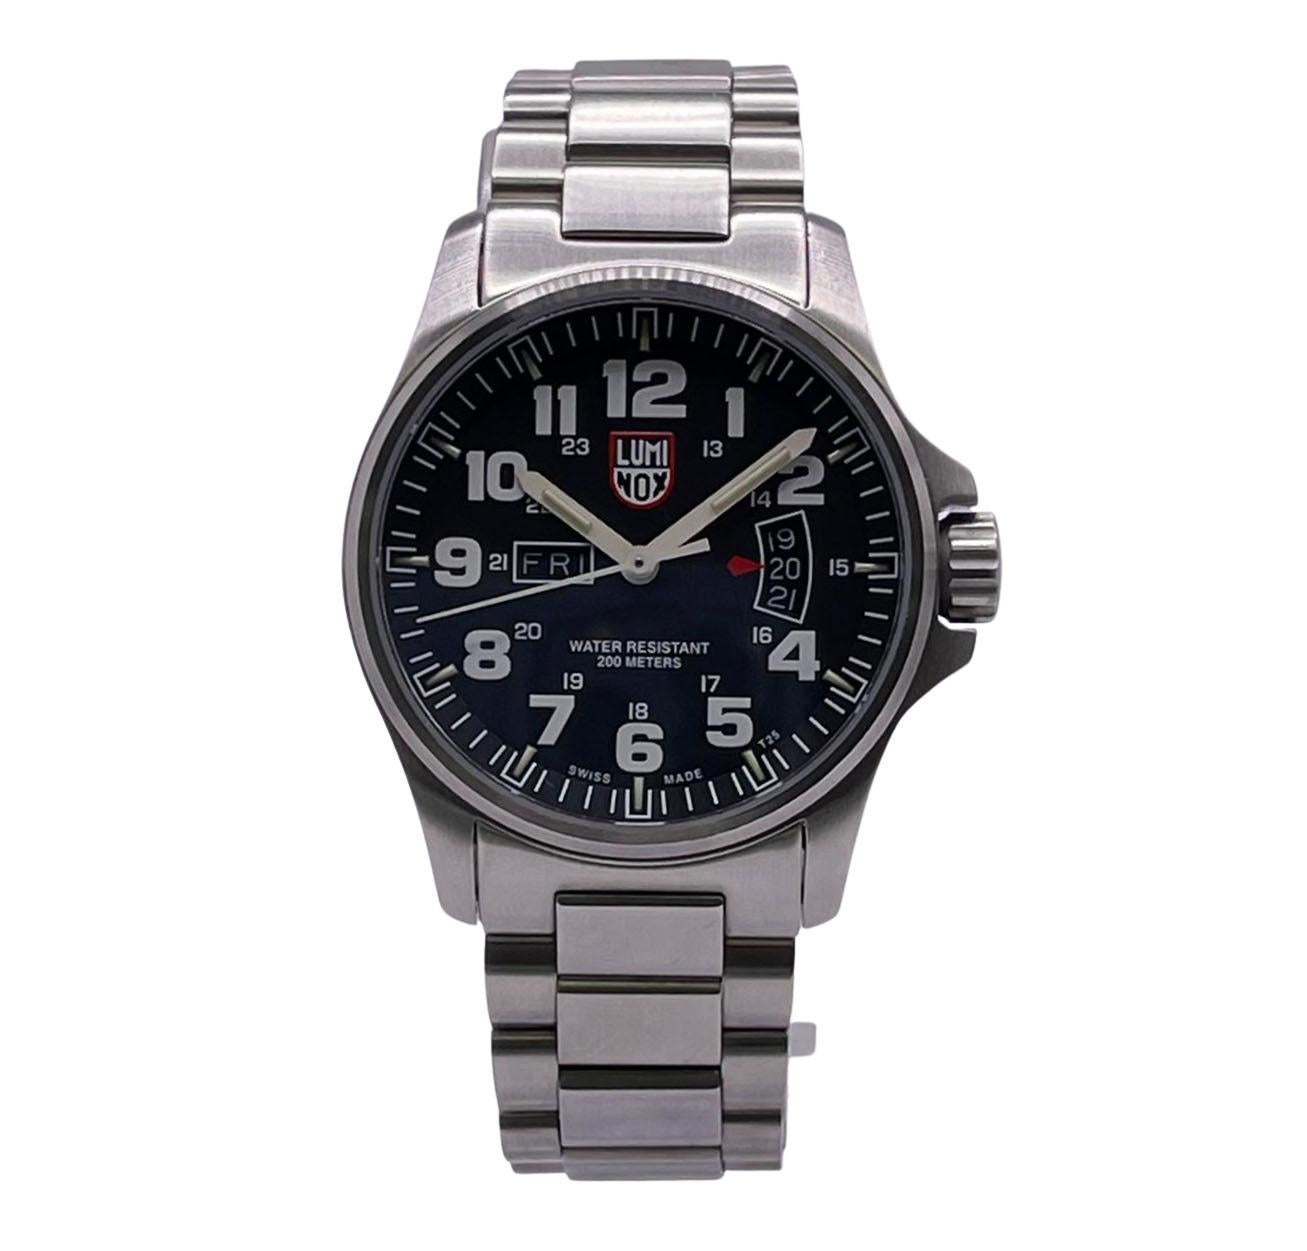 Unworn Luminox Field Day Date Men's Watch XS.1822. This Timepiece is powered by Quartz (battery) movement with features: Stainless Steel and a bracelet. Black Dial with white luminous hands and white Arabic numeral markers. Date and Day window